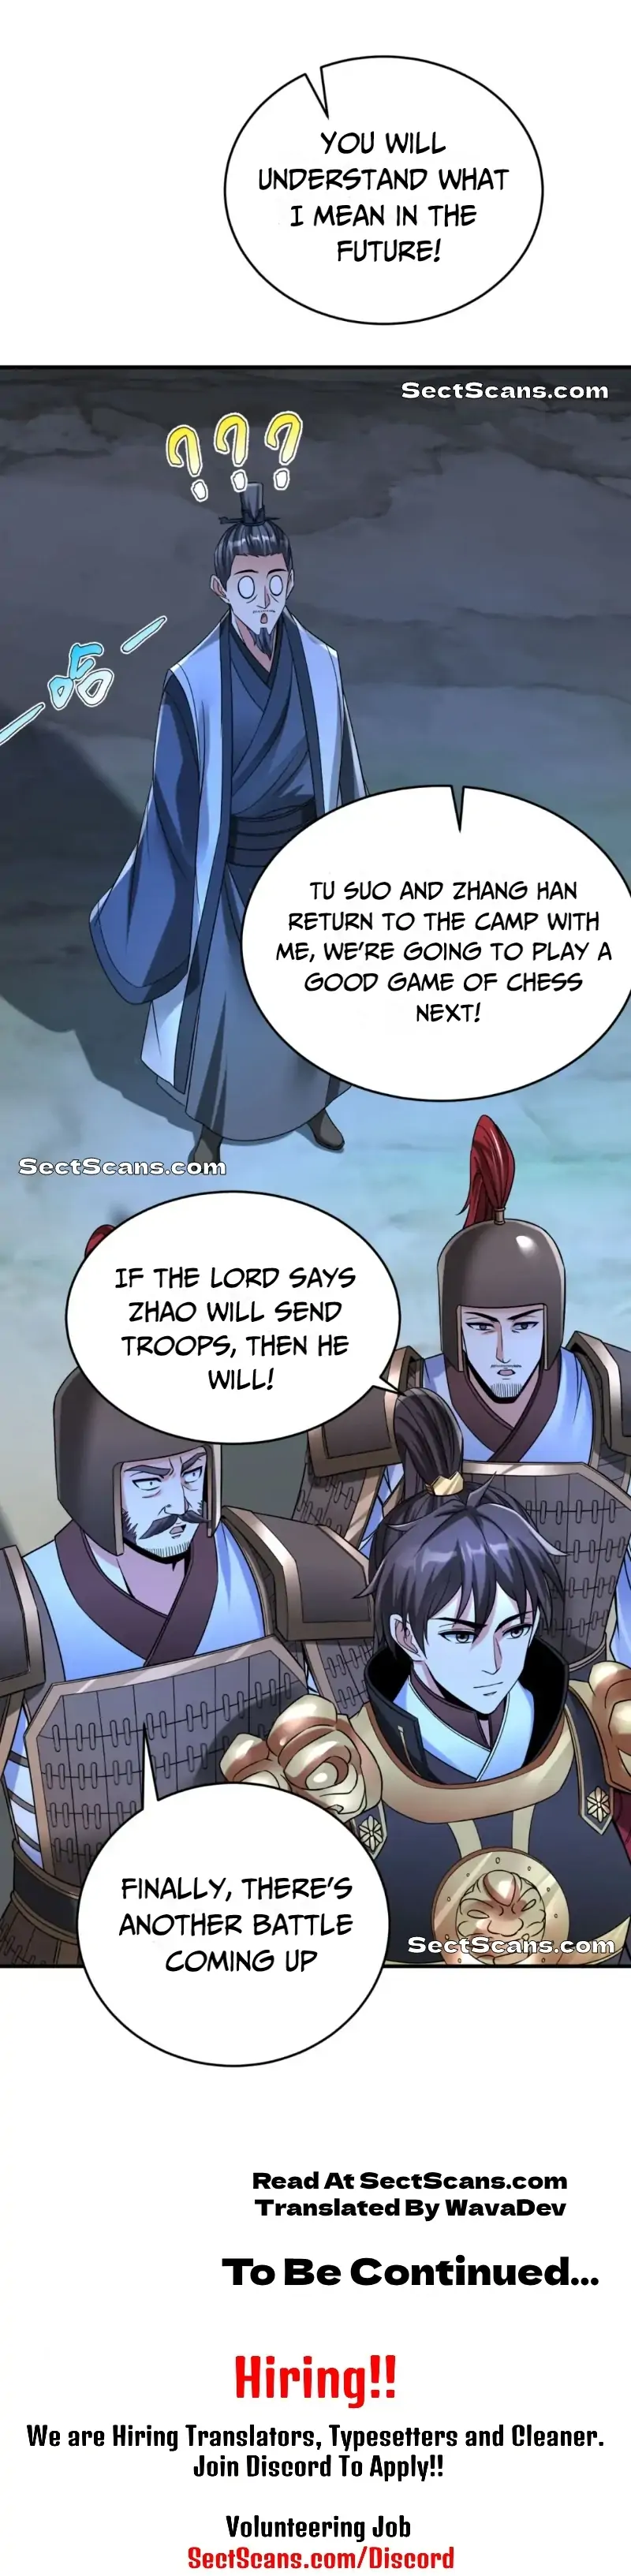 The Son Of The First Emperor Kills Enemies And Becomes A God Chapter 27 - Page 17